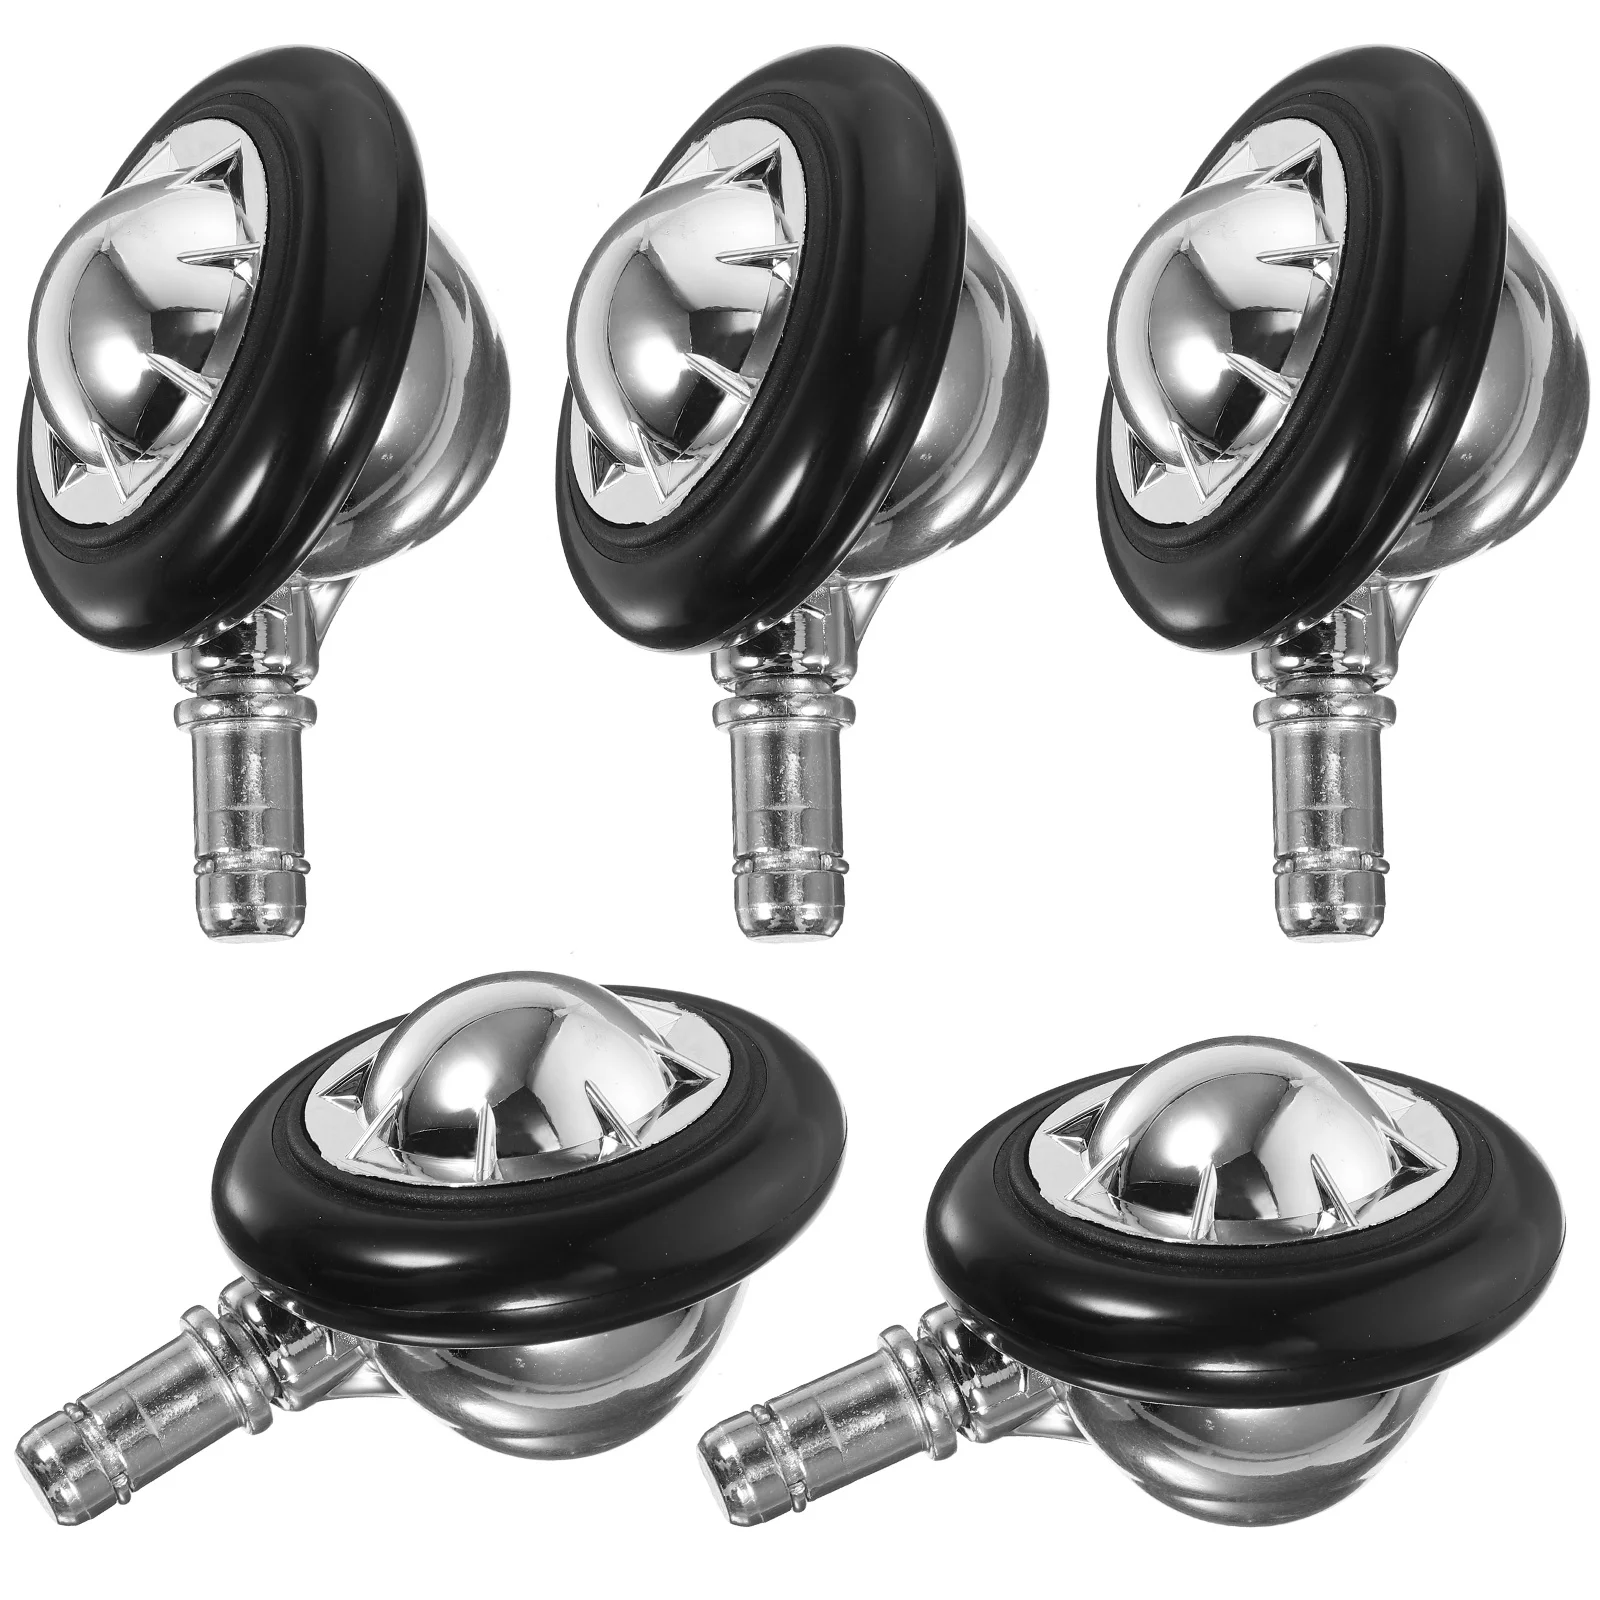 

5pcs Office Chair Casters Desk Chair Wheels Replacements Home Caster Wheels